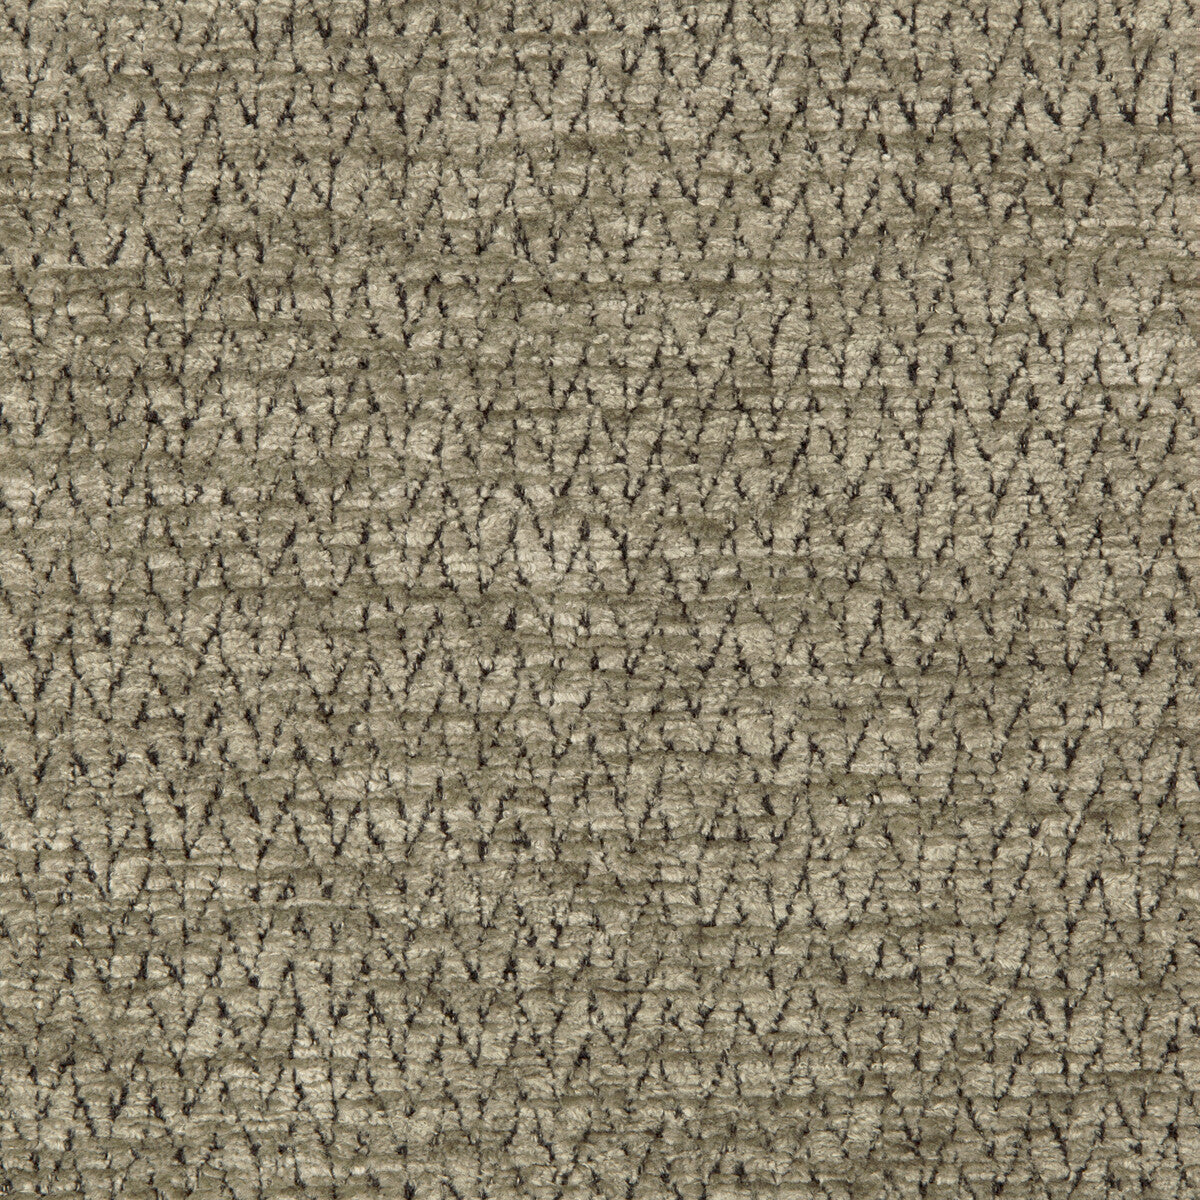 Cassien Texture fabric in stone color - pattern 8019146.118.0 - by Brunschwig &amp; Fils in the Chambery Textures II collection